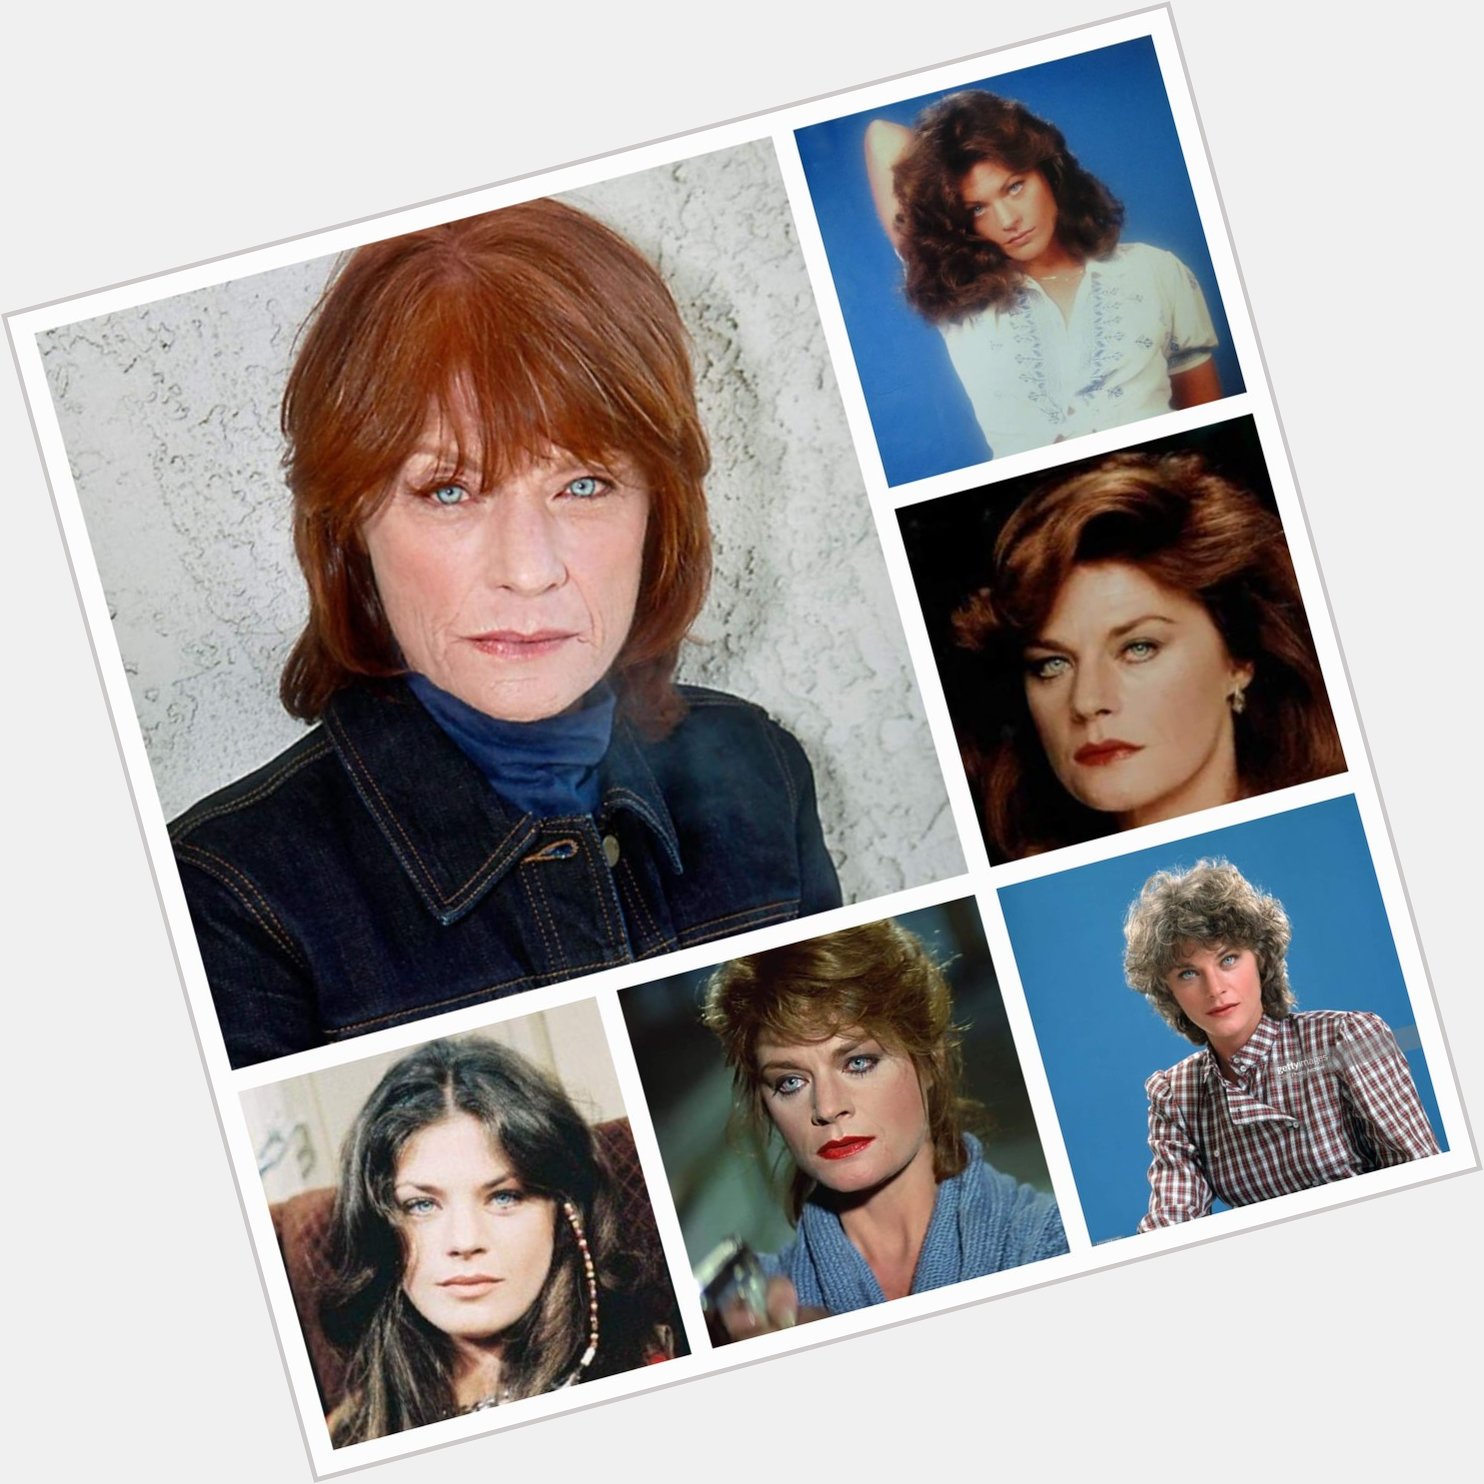 Happy 74th Birthday to Meg Foster (May 10th)
Credit: Flashback to the 80\s 